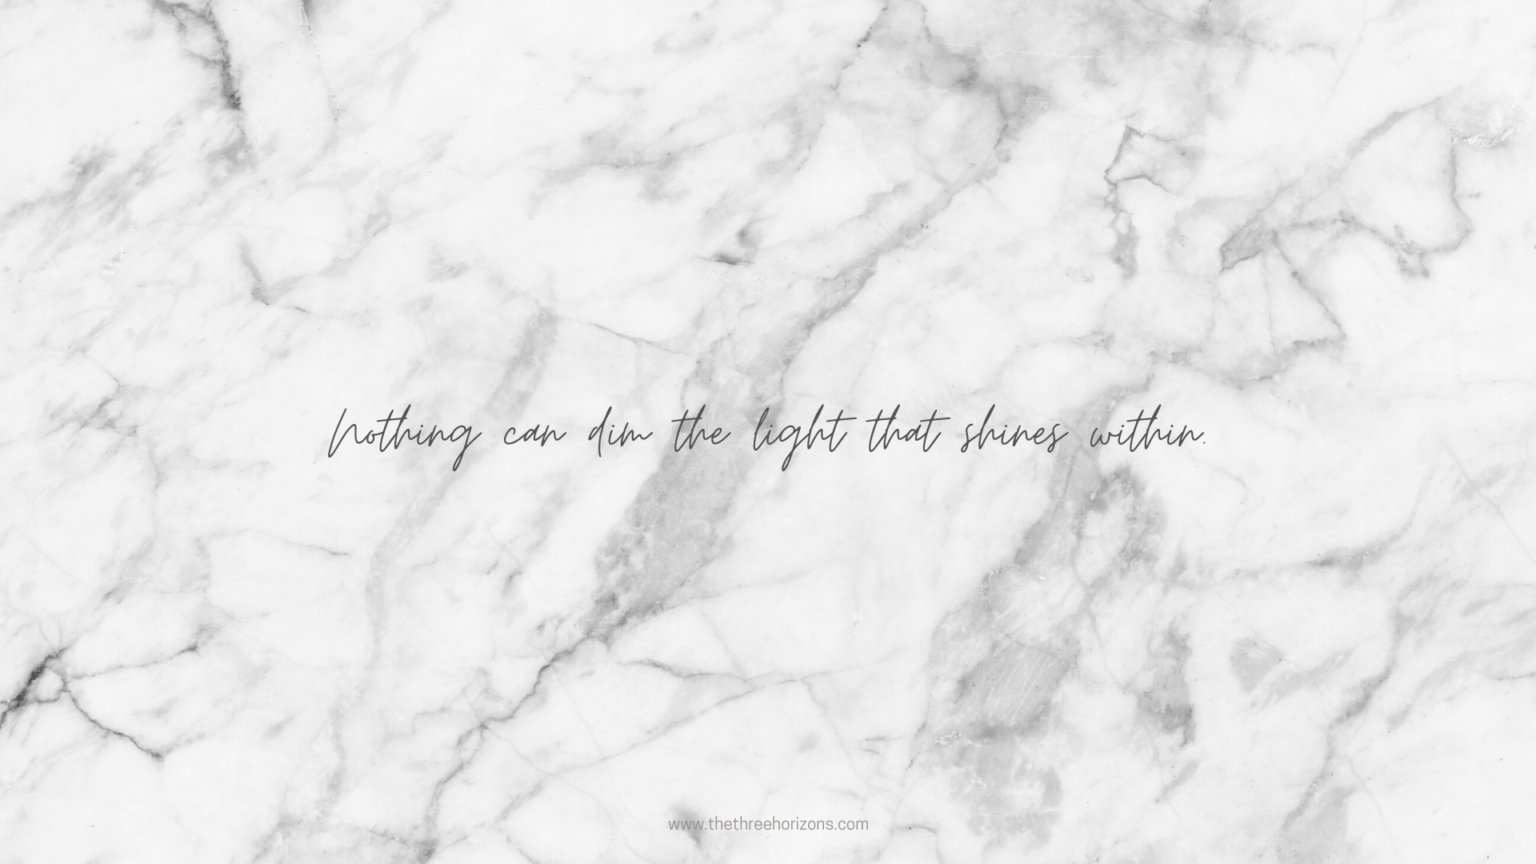 A quote on white marble with black text - Marble